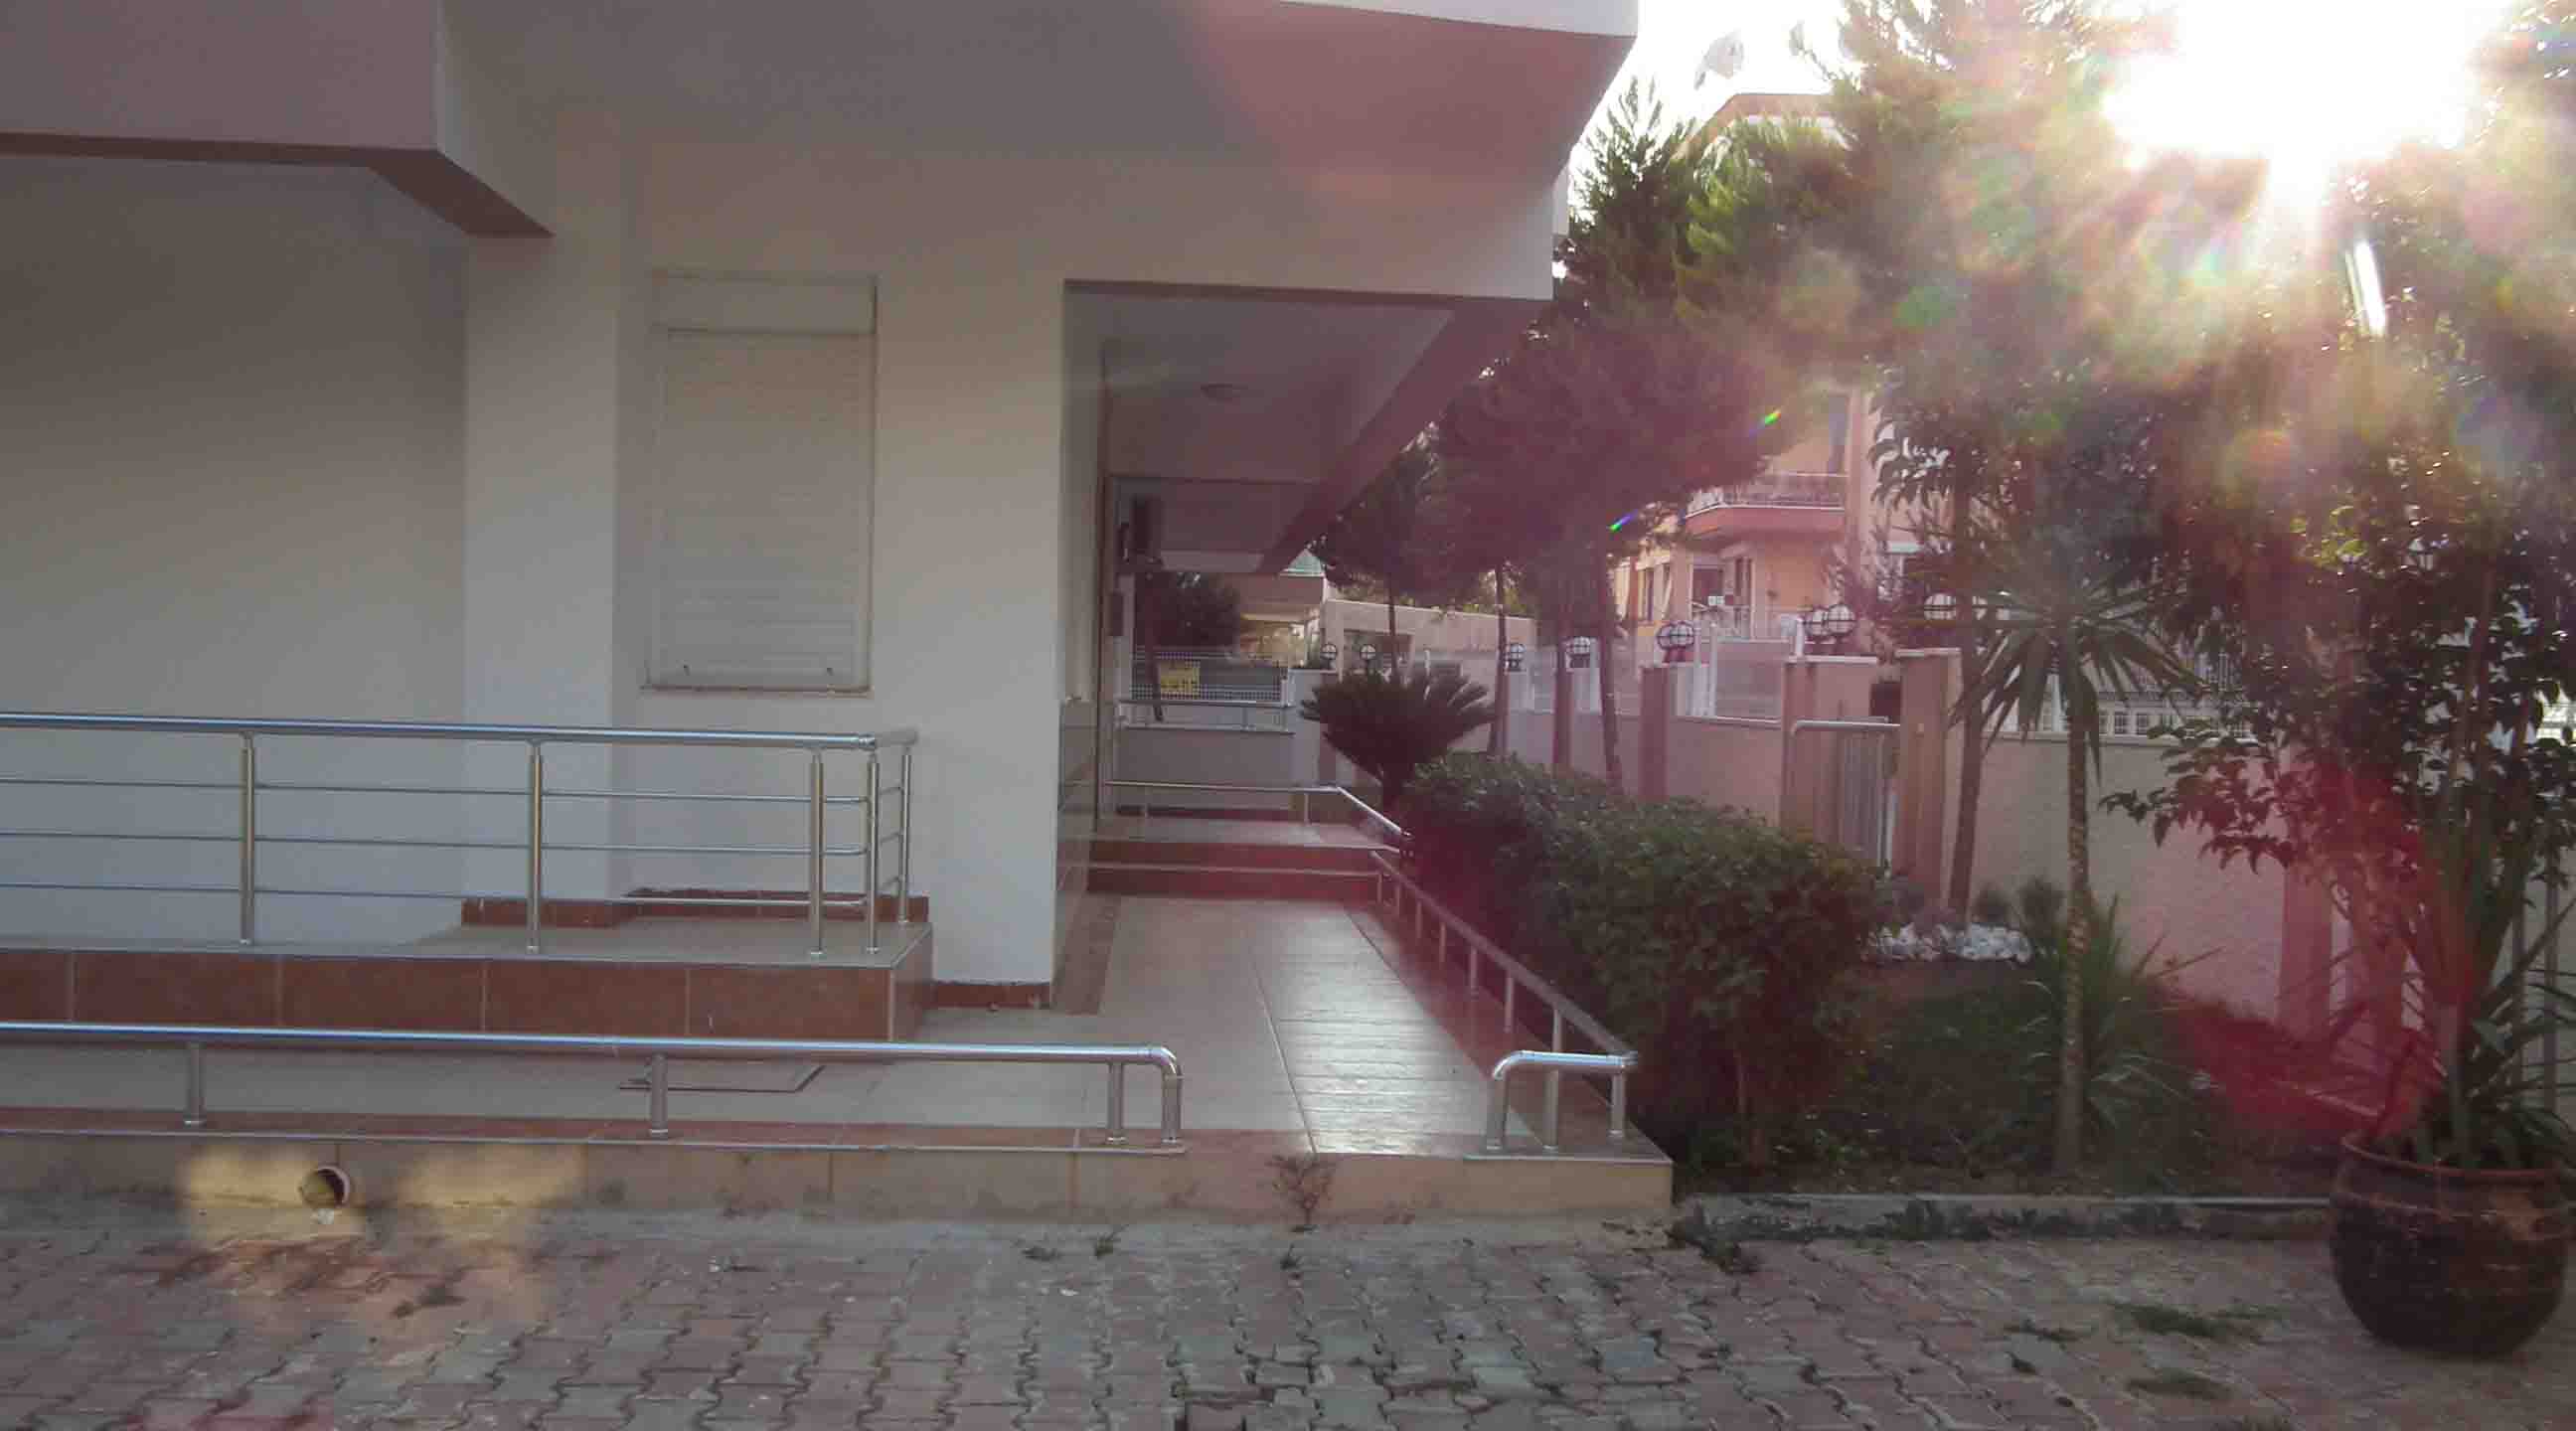 Real Estate House in Antalya Turkey for sale 2